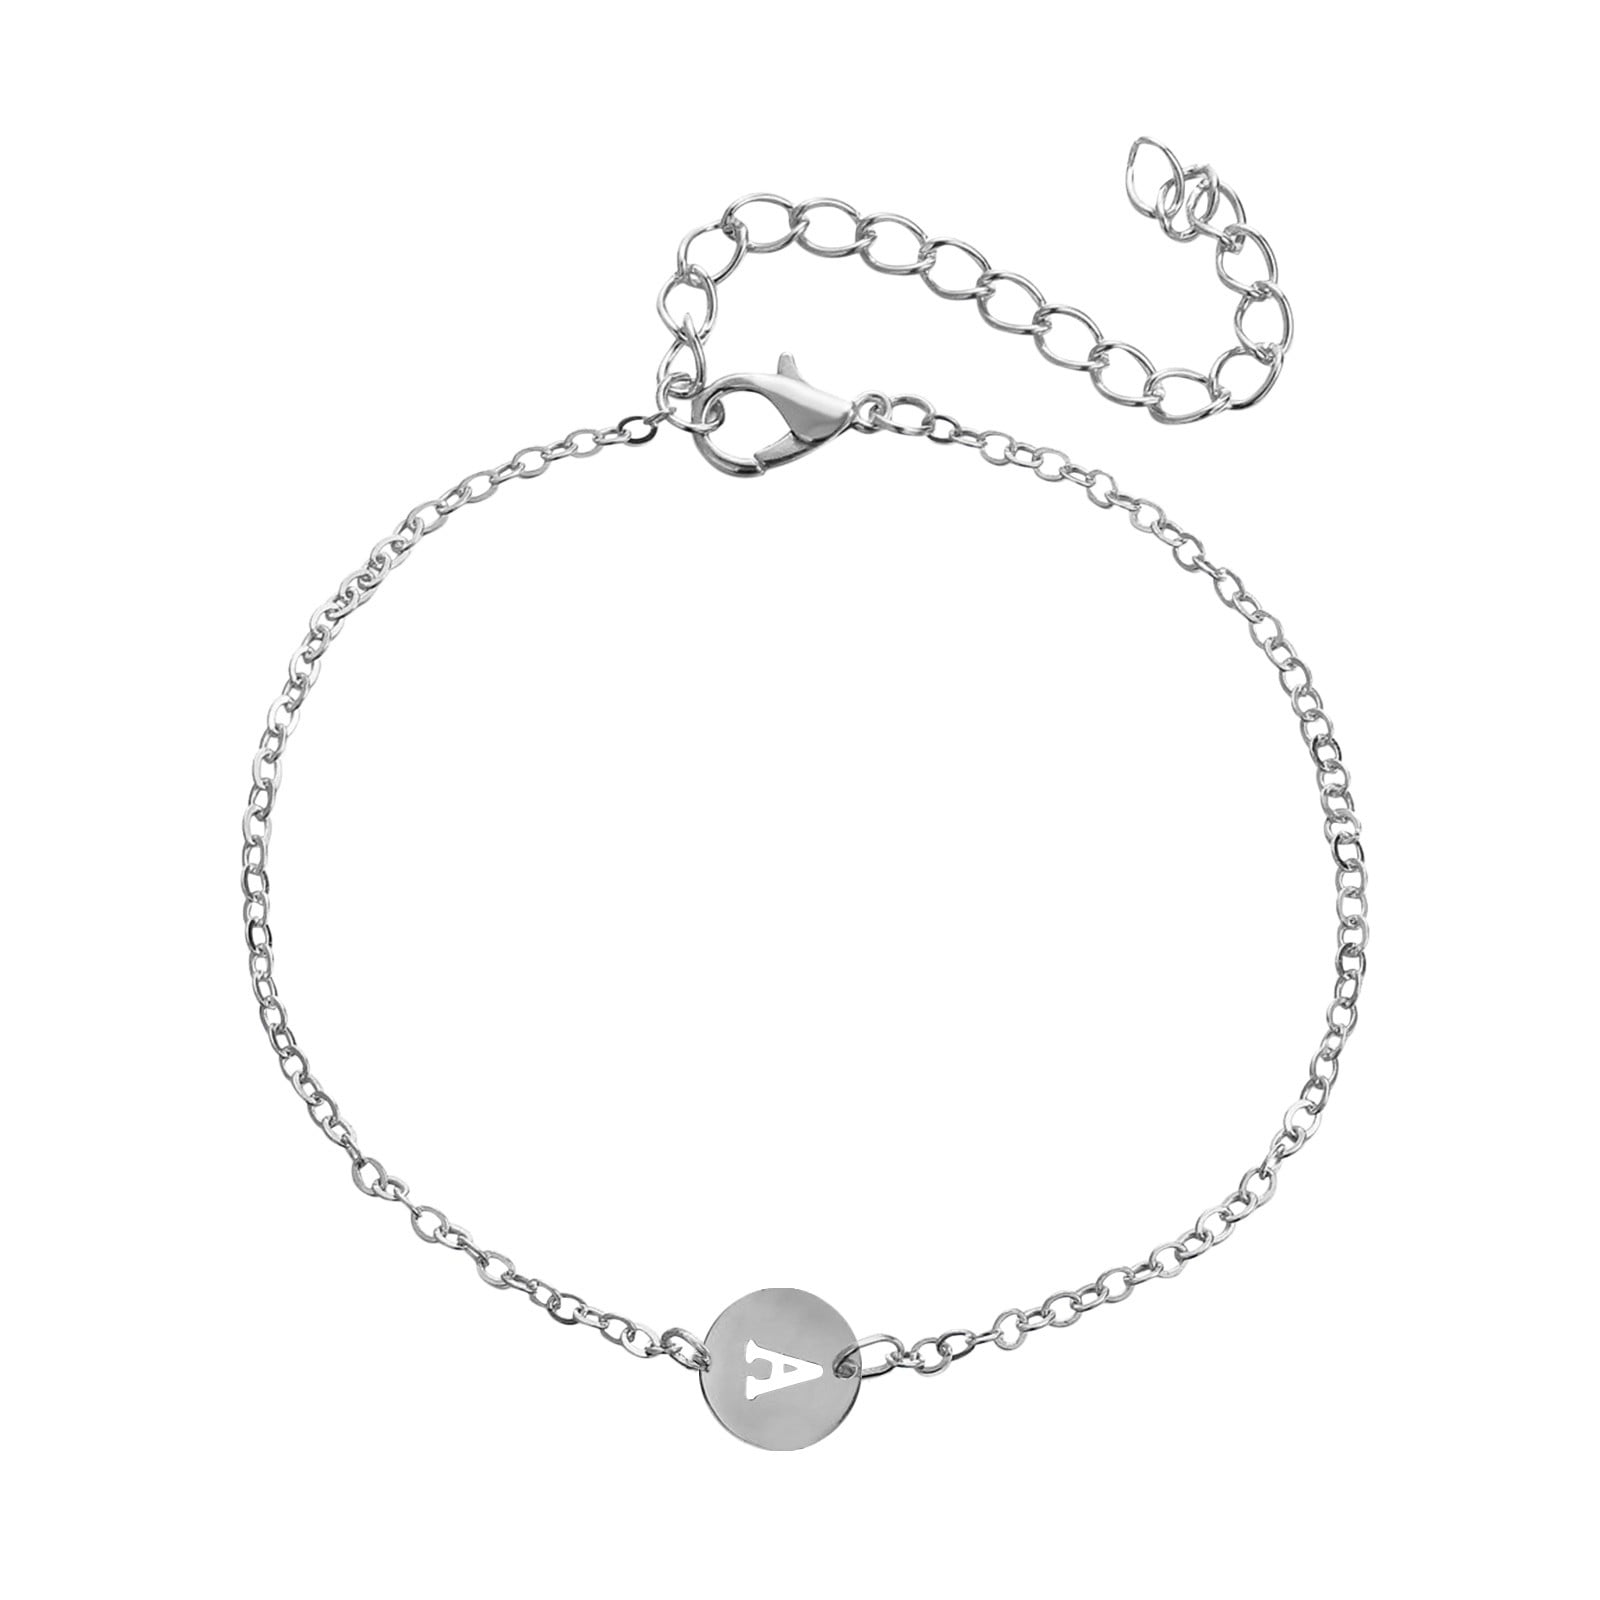 Silver Plated Sister Bracelet Personalized Initial Bracelet Silver ...